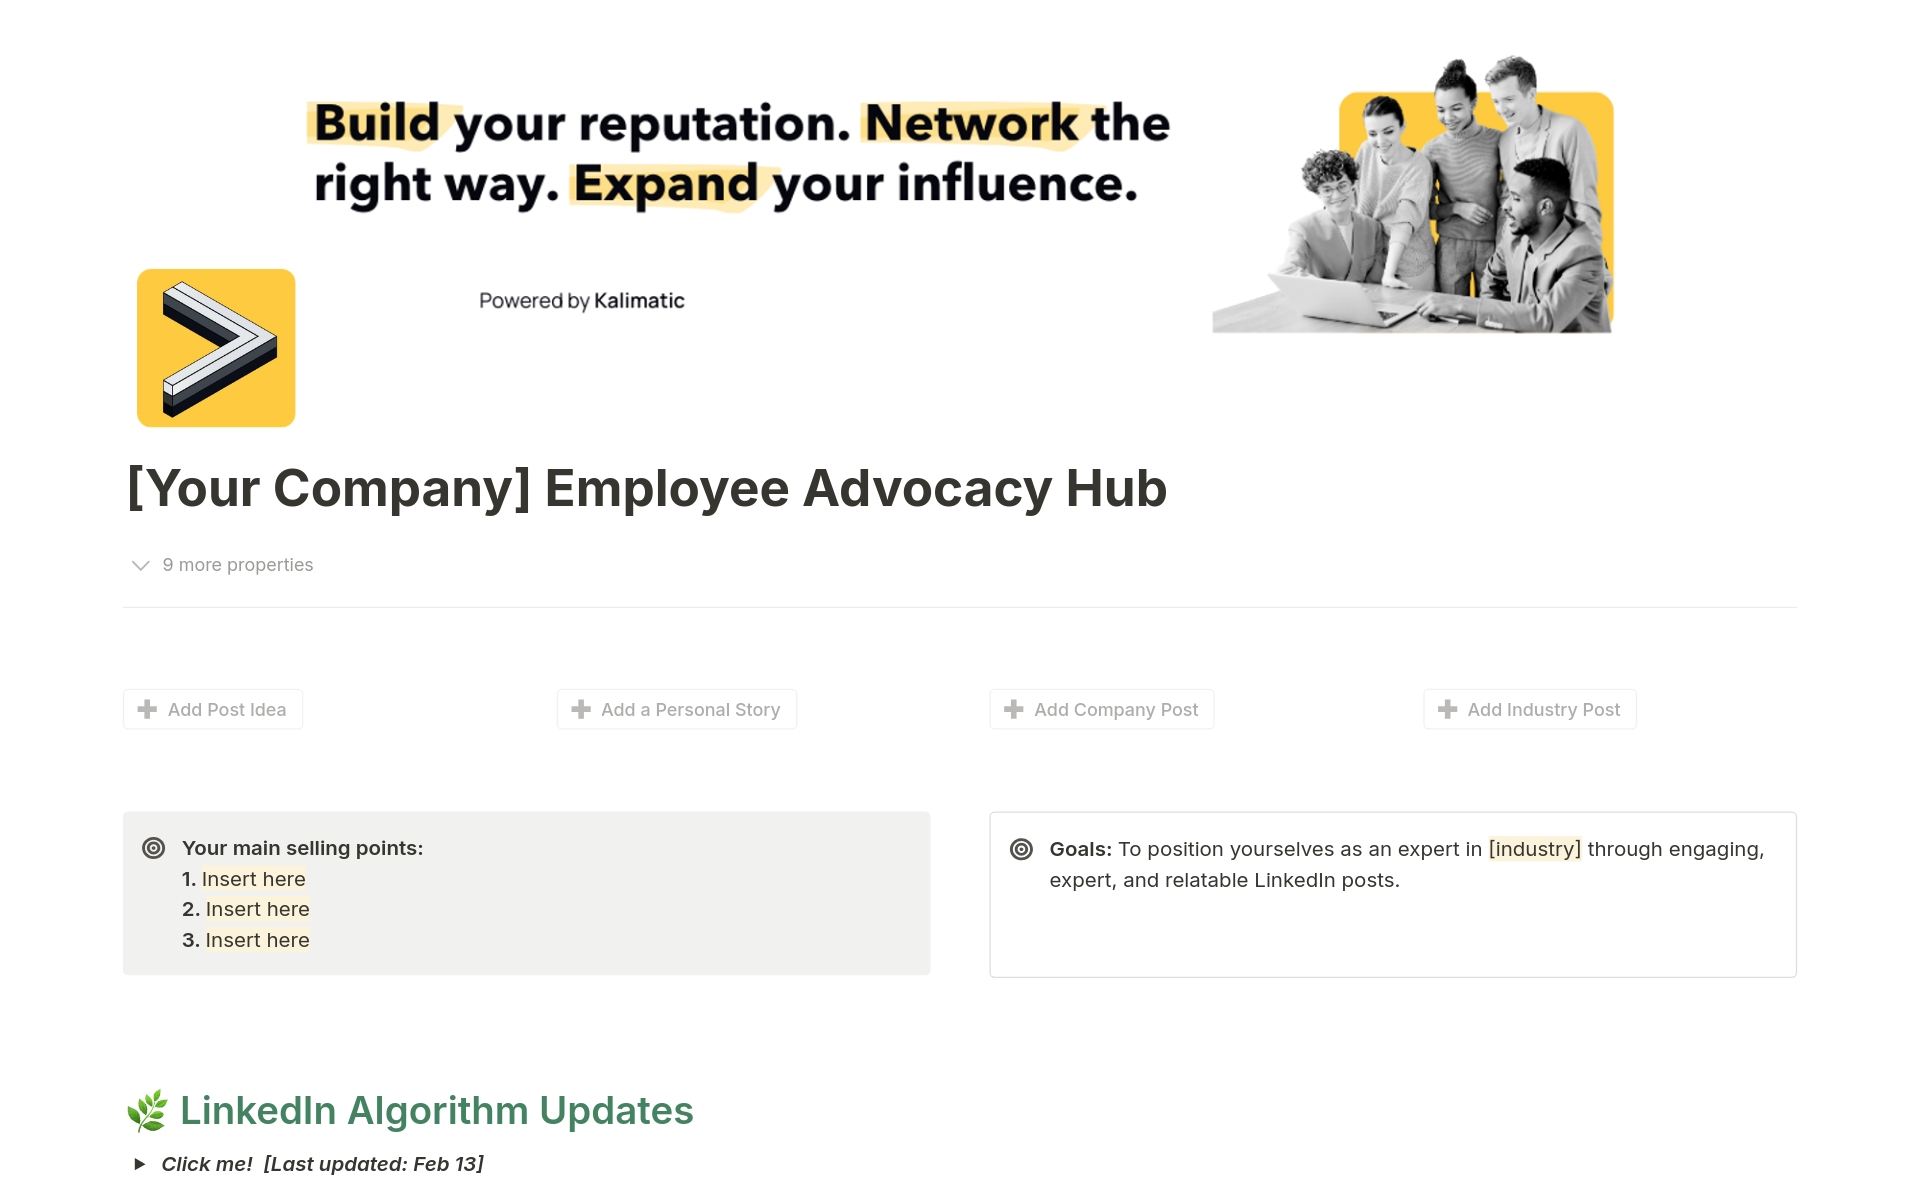 Empower your employees to be the voice of your brand with this easy-to-use Notion Dashboard.

Make it simple for your team to share company content, industry trends, and news through their networks. Boost brand awareness and establish thought leadership.